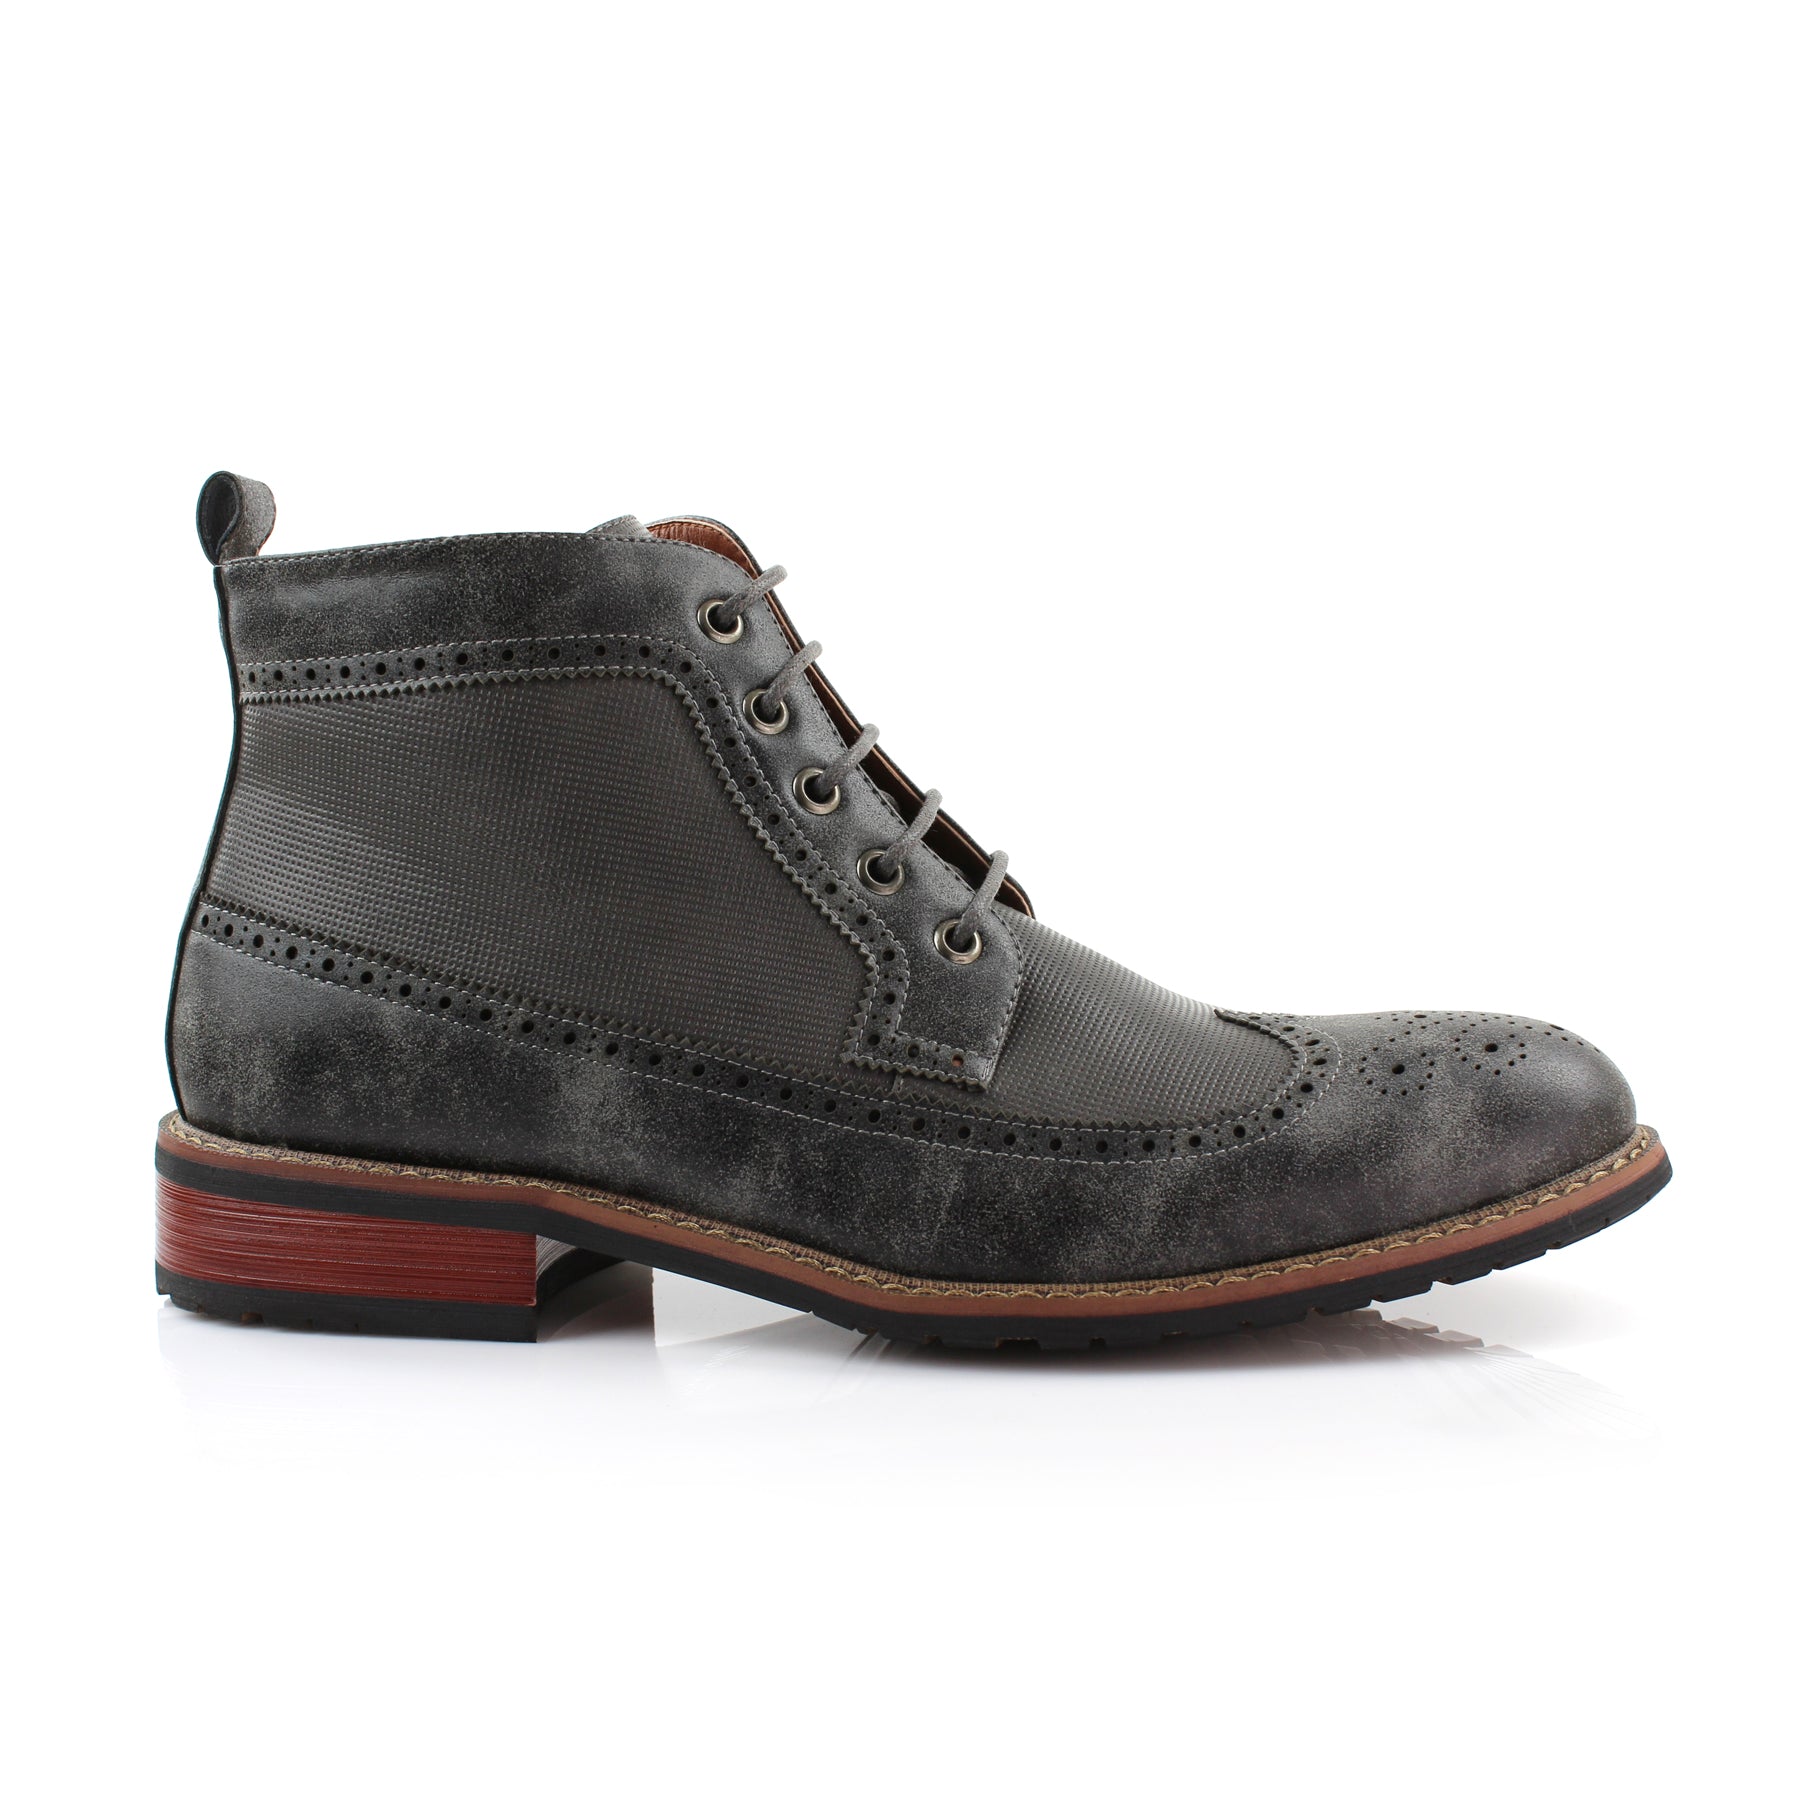 Burnished Brogue Wingtip Boots | Michael by Ferro Aldo | Conal Footwear | Outer Side Angle View